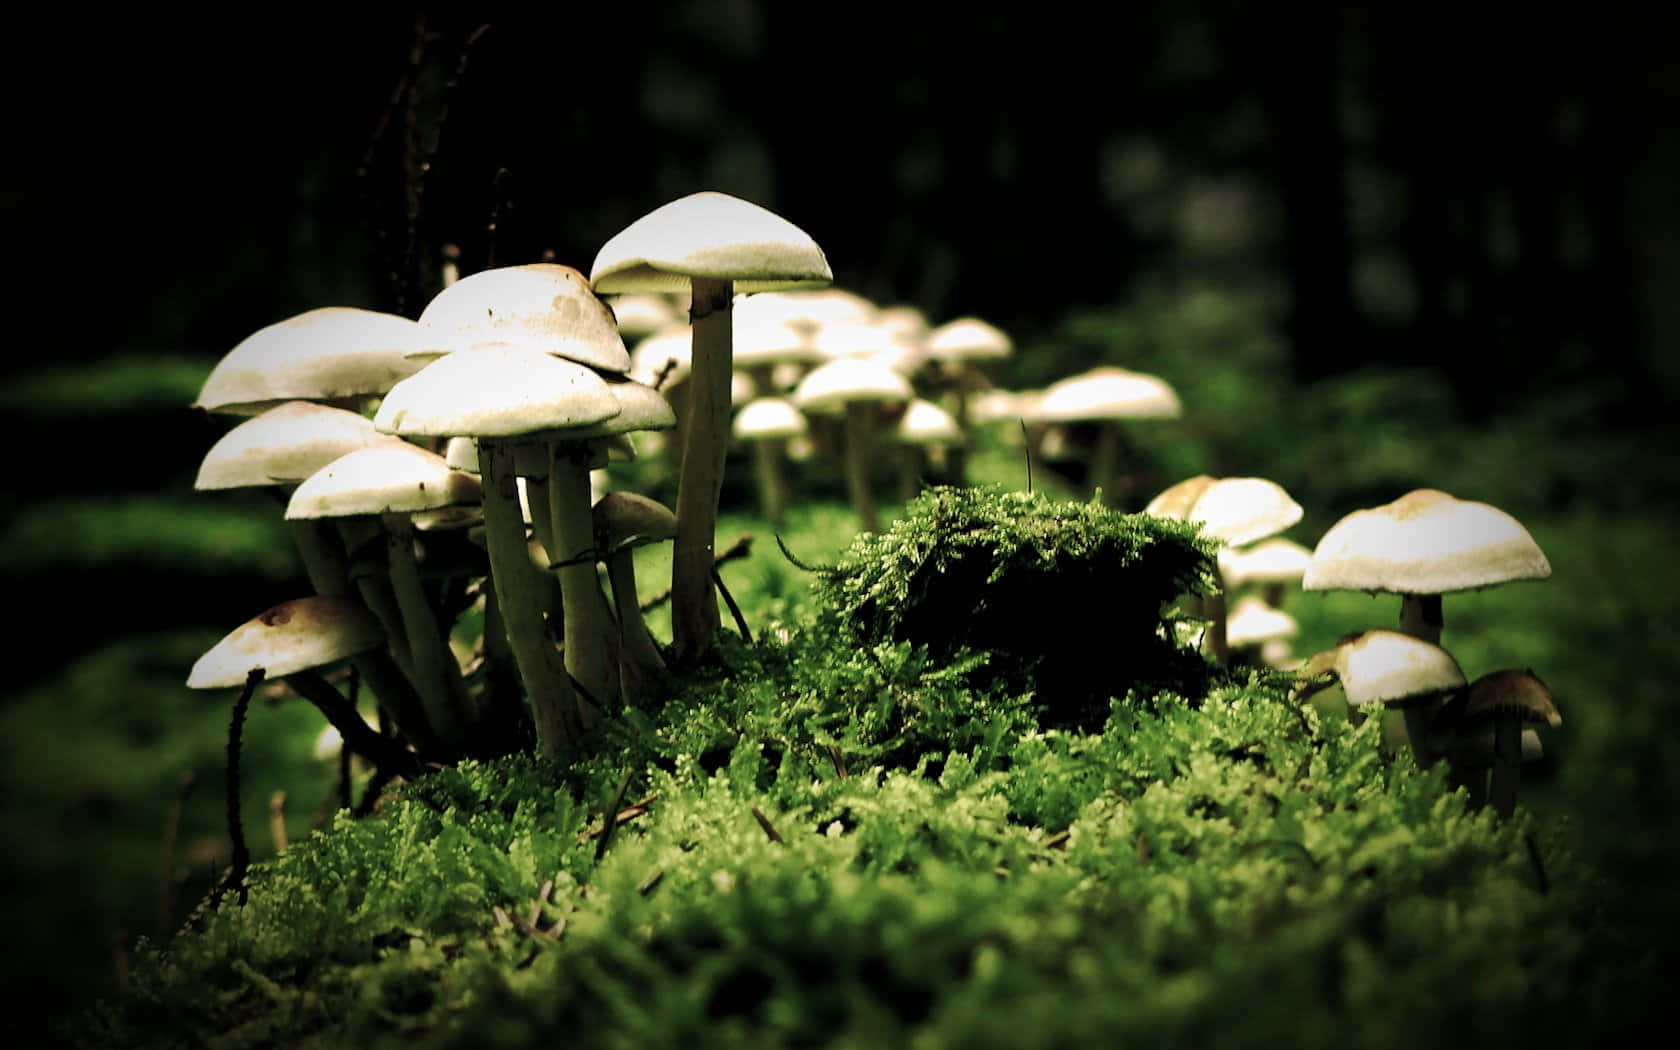 Bonnet Fungus Cluster On Mossy Ground Background